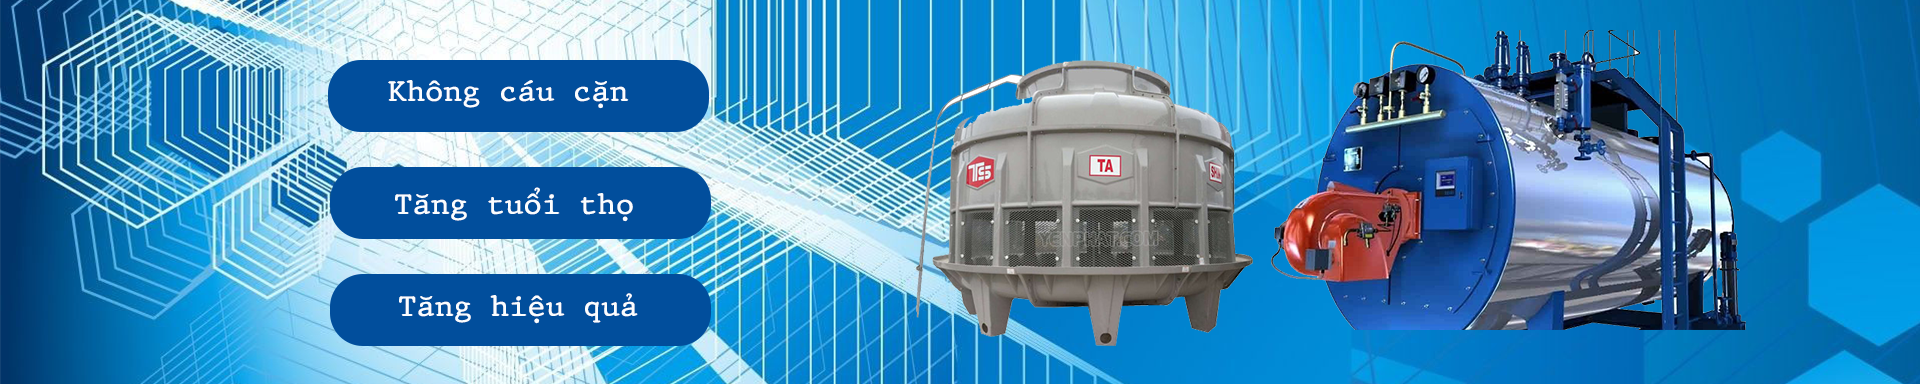 Banner trang con lo hoi cooling tower